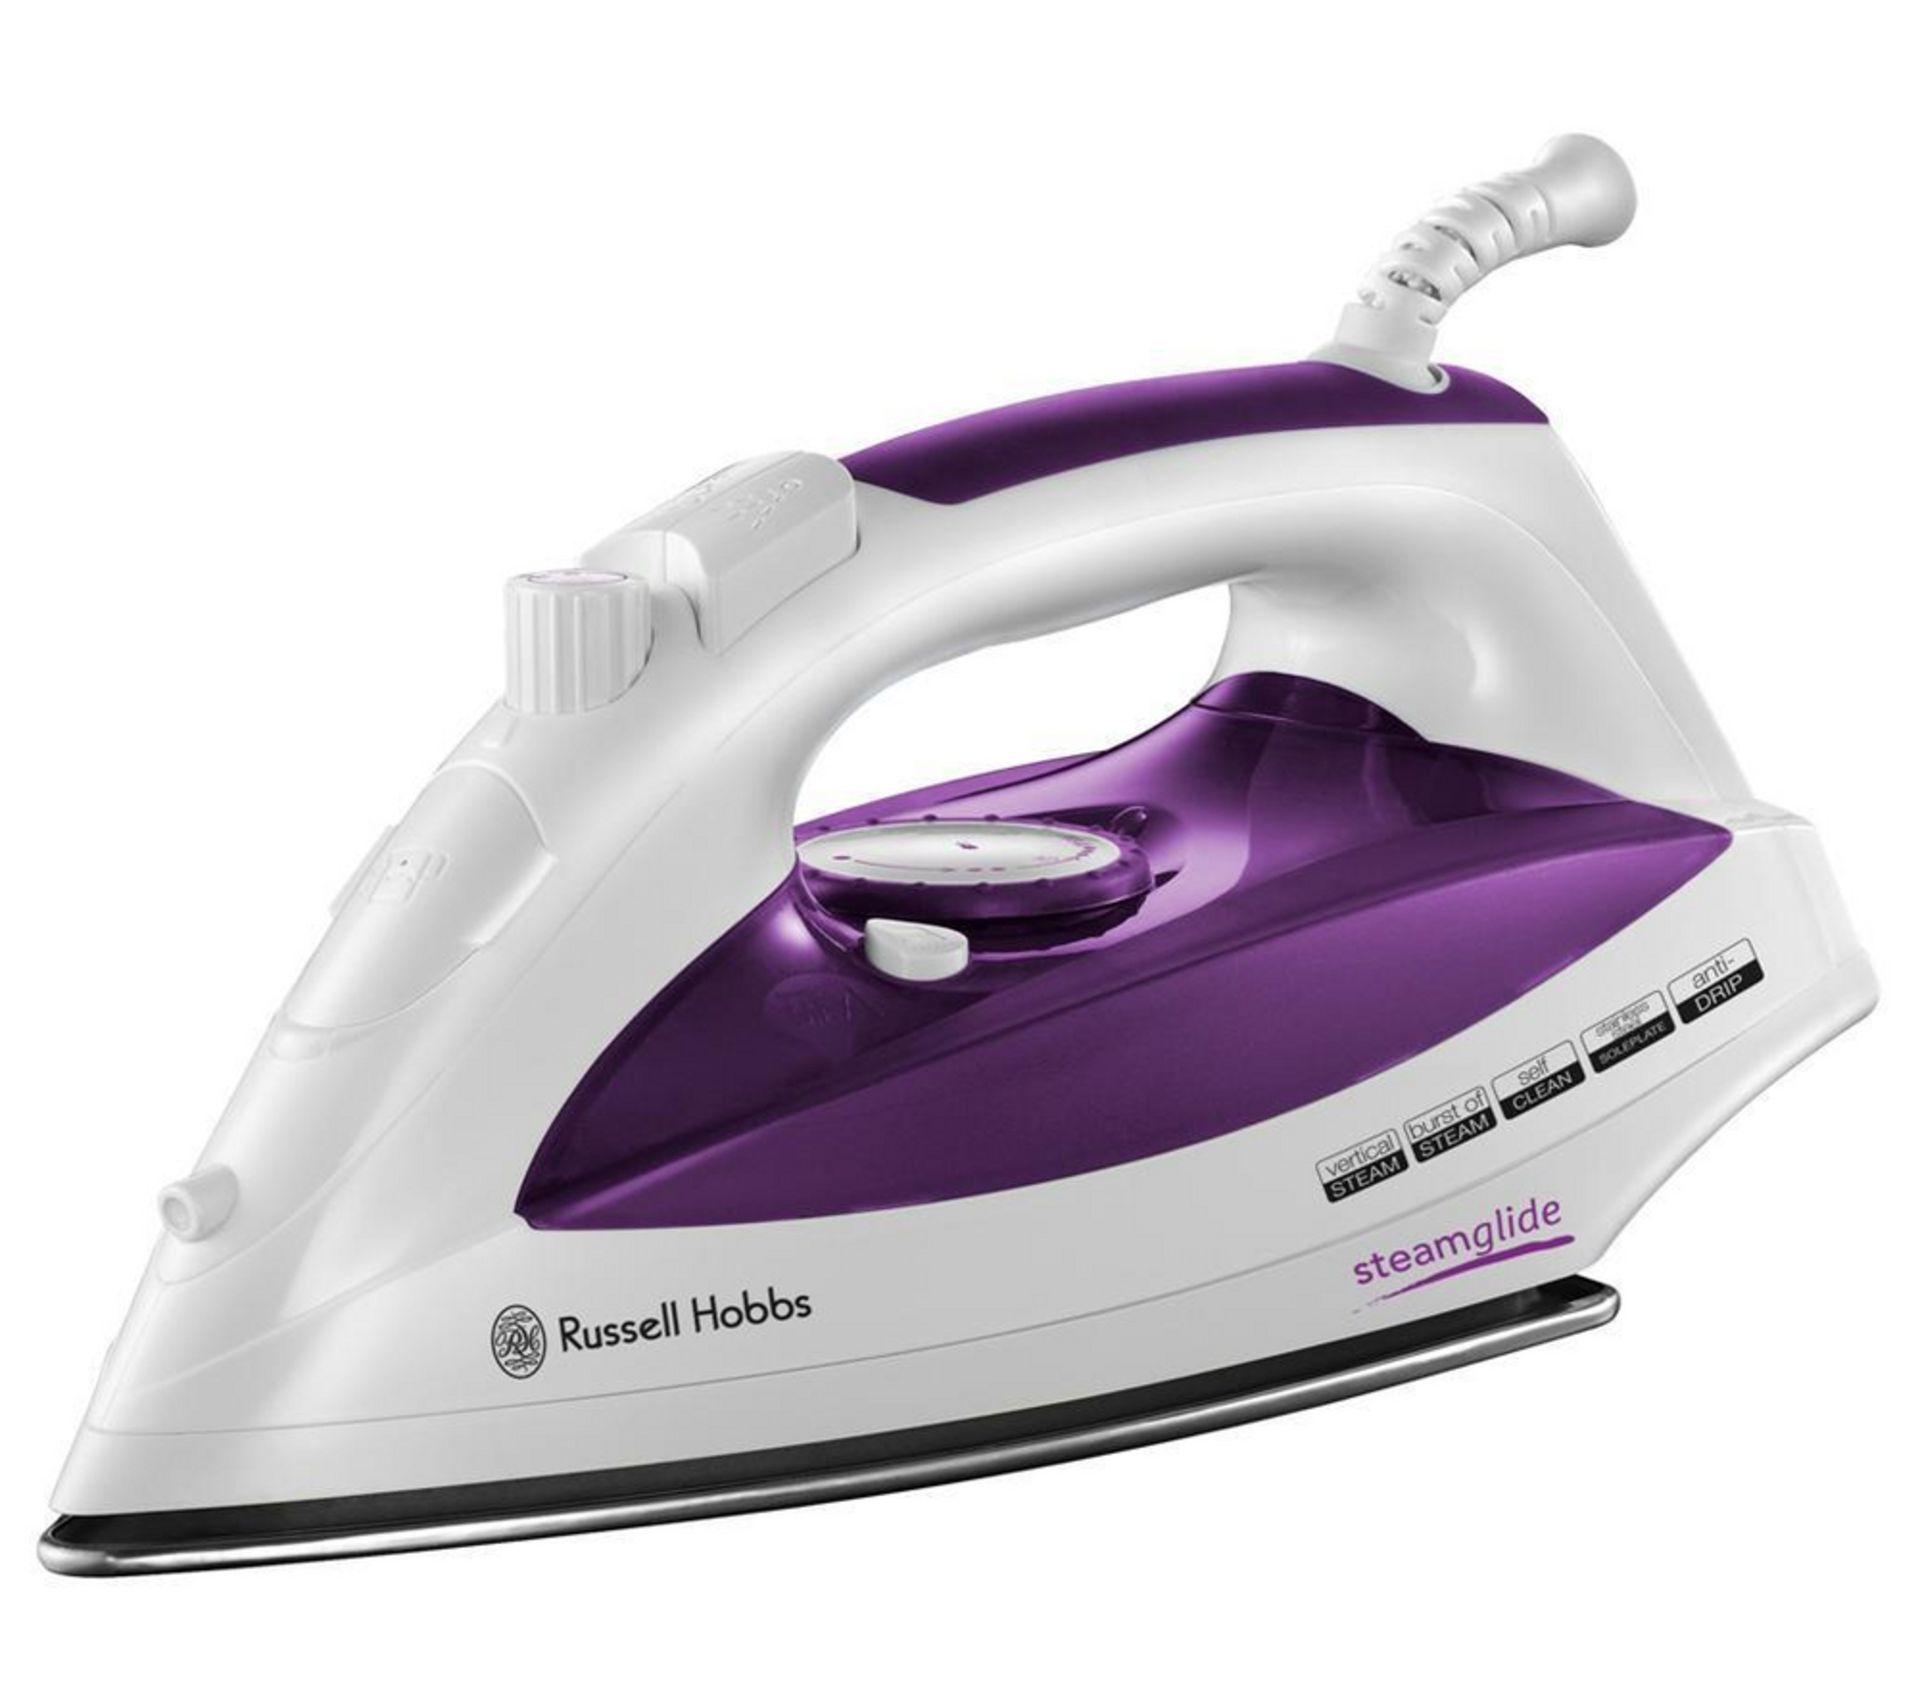 Brand New Russell Hobbs Steamglide Iron 2400W - Stainless Steel Plate - Self Clean- Anti Drip - ISP - Image 3 of 4